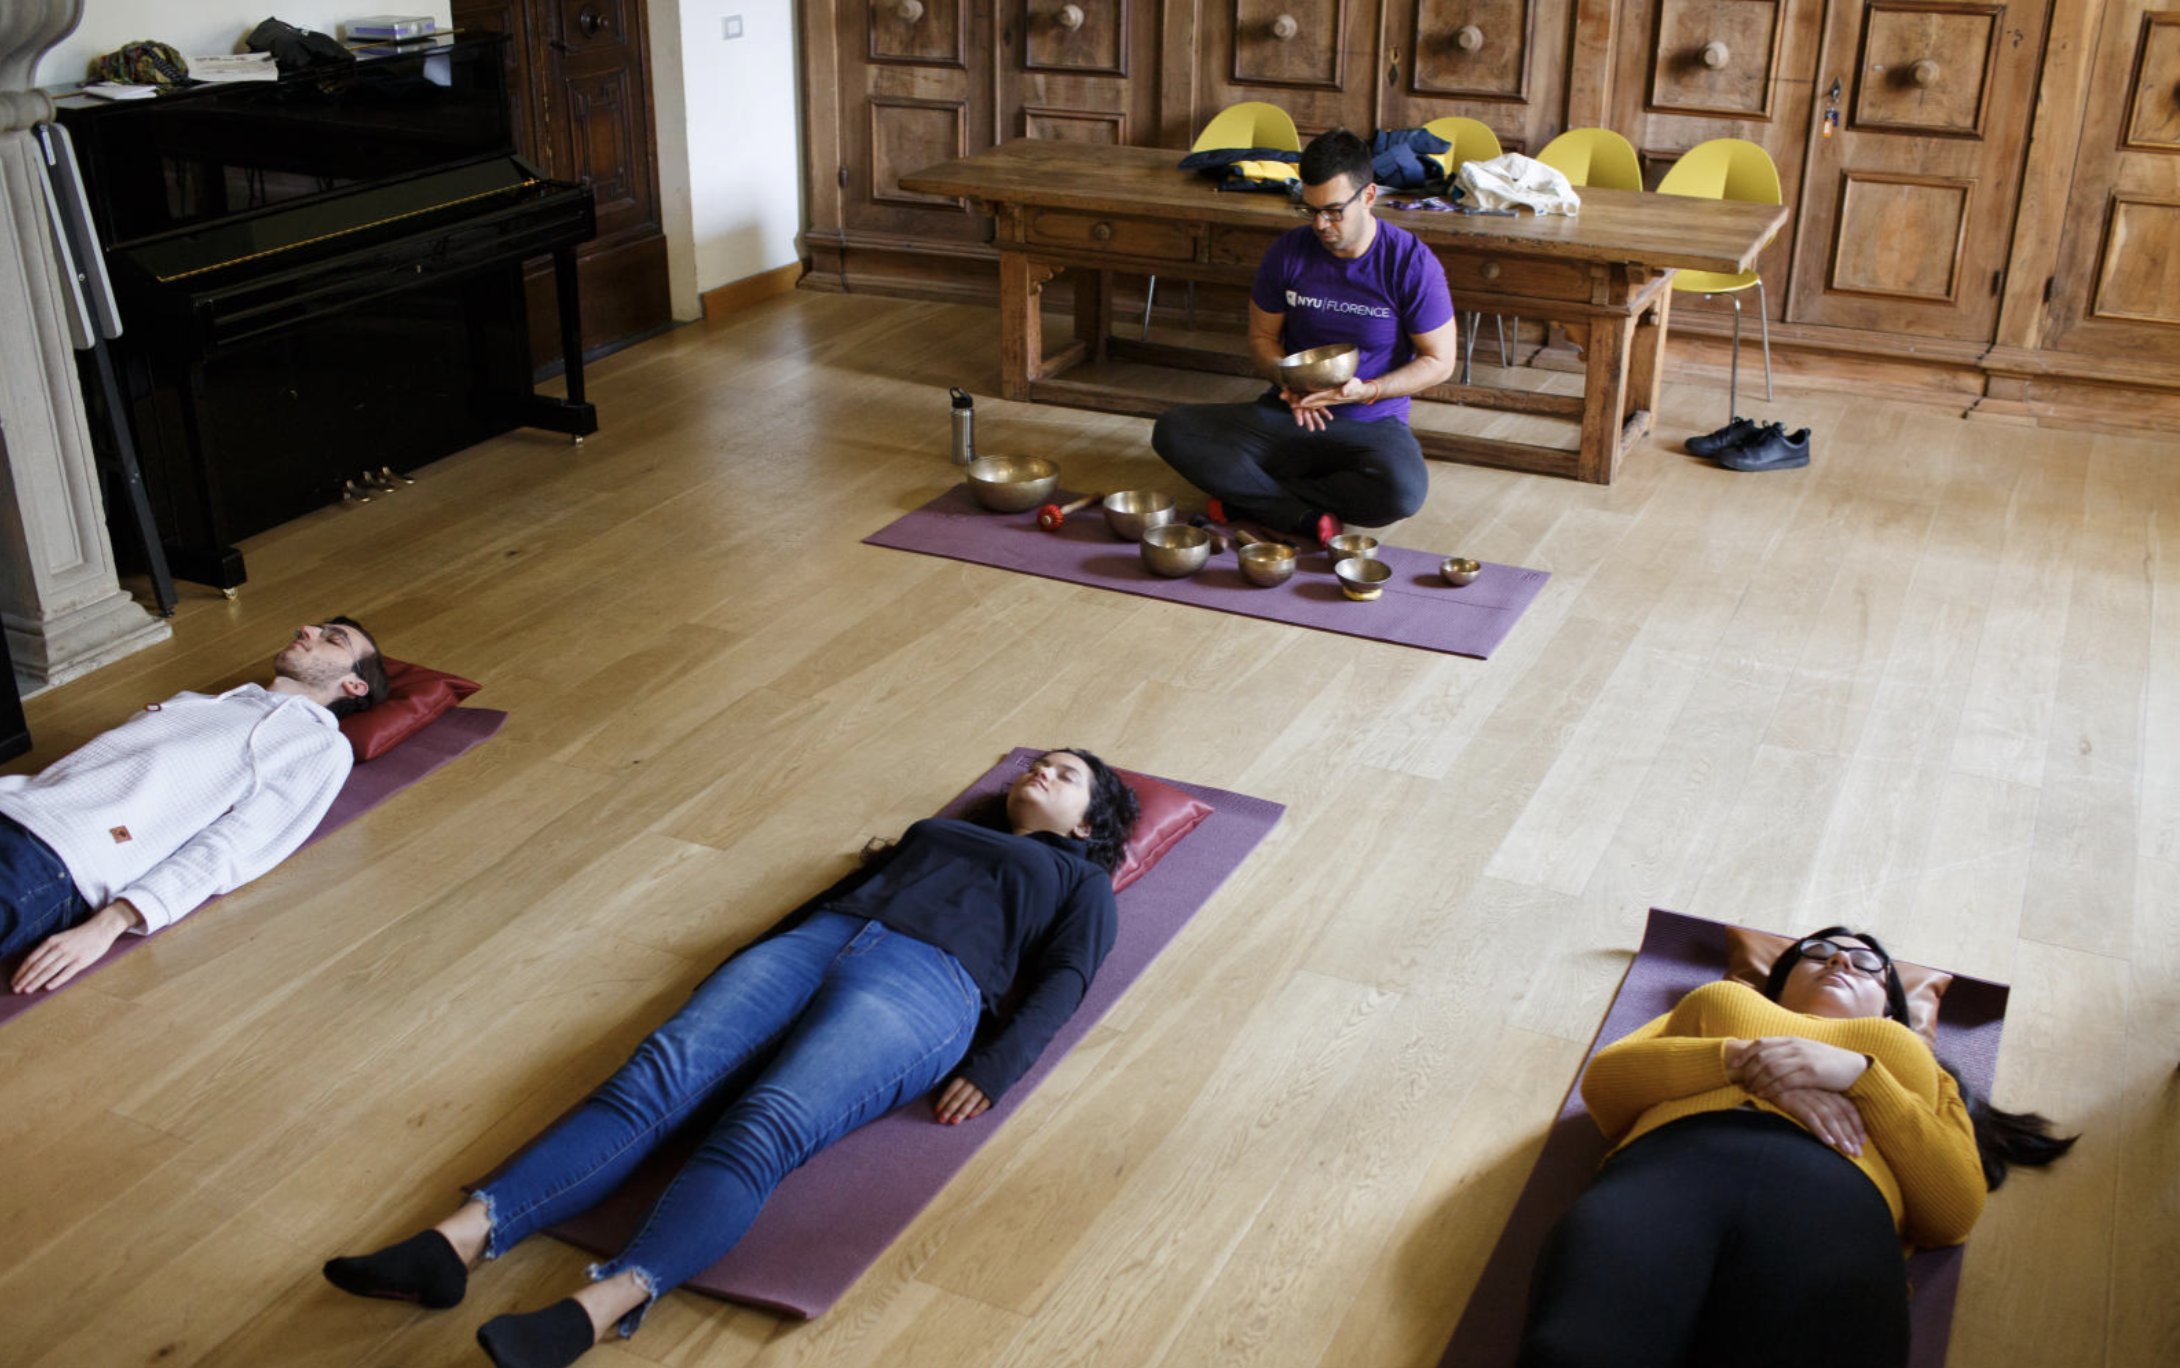 Students lay down on yoga mats while the instructor plays a singing bowl.